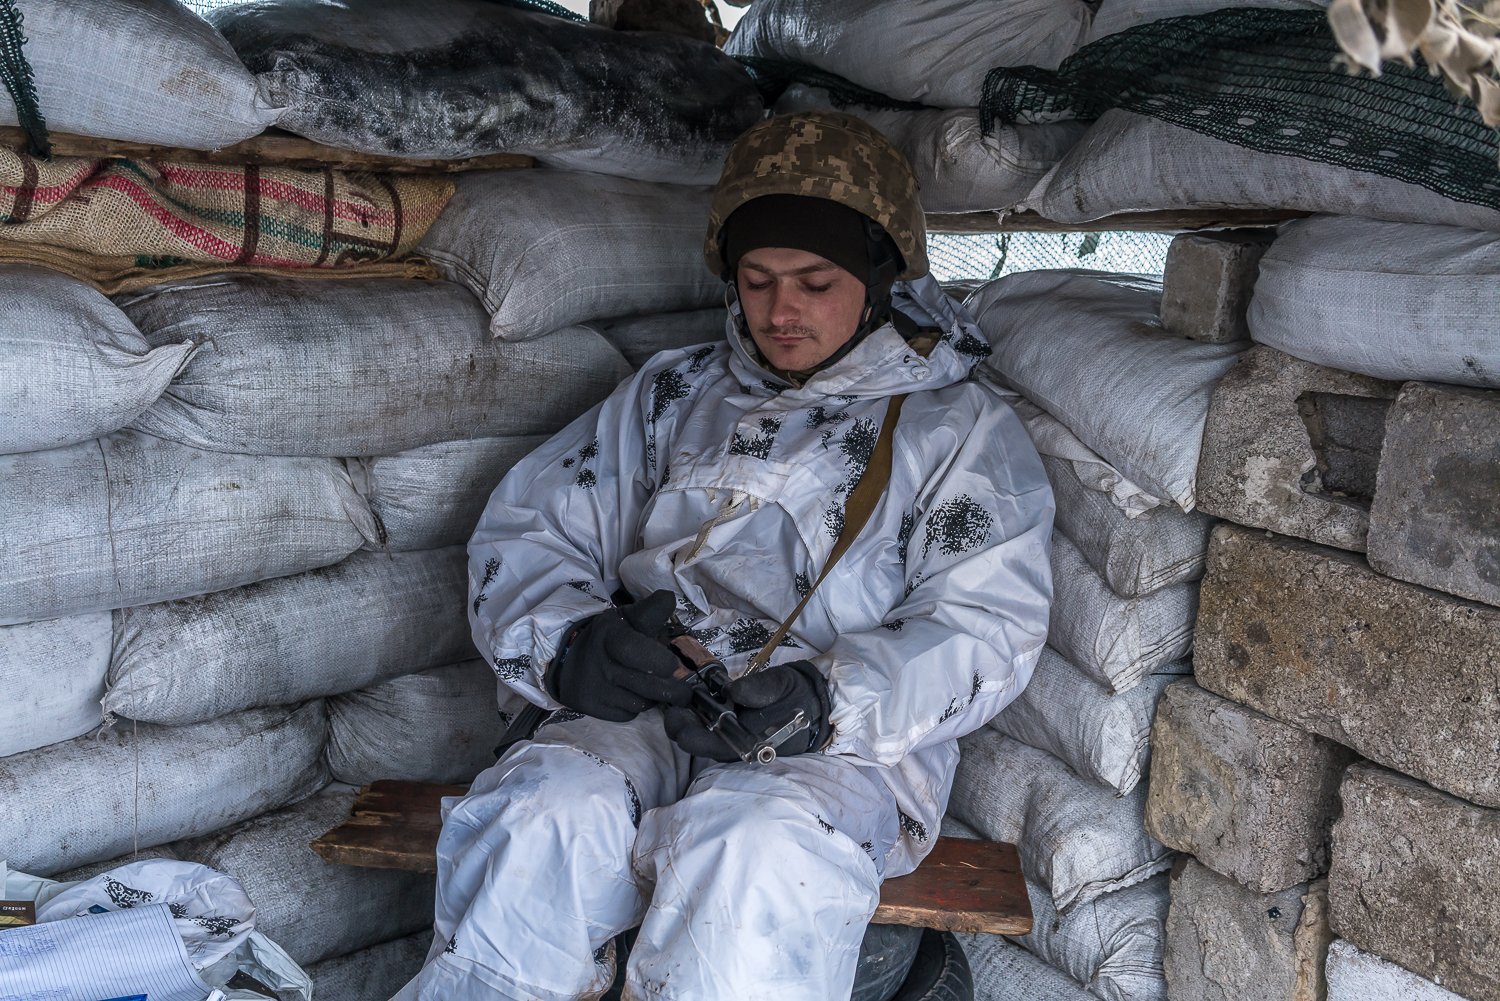  Andriy, a Ukrainian soldier with the 53rd Mechanized Brigade, sits in a small shelter at a checkpoint on the road into town on Saturday, January 29, 2022 in Chermalyk, Ukraine. 